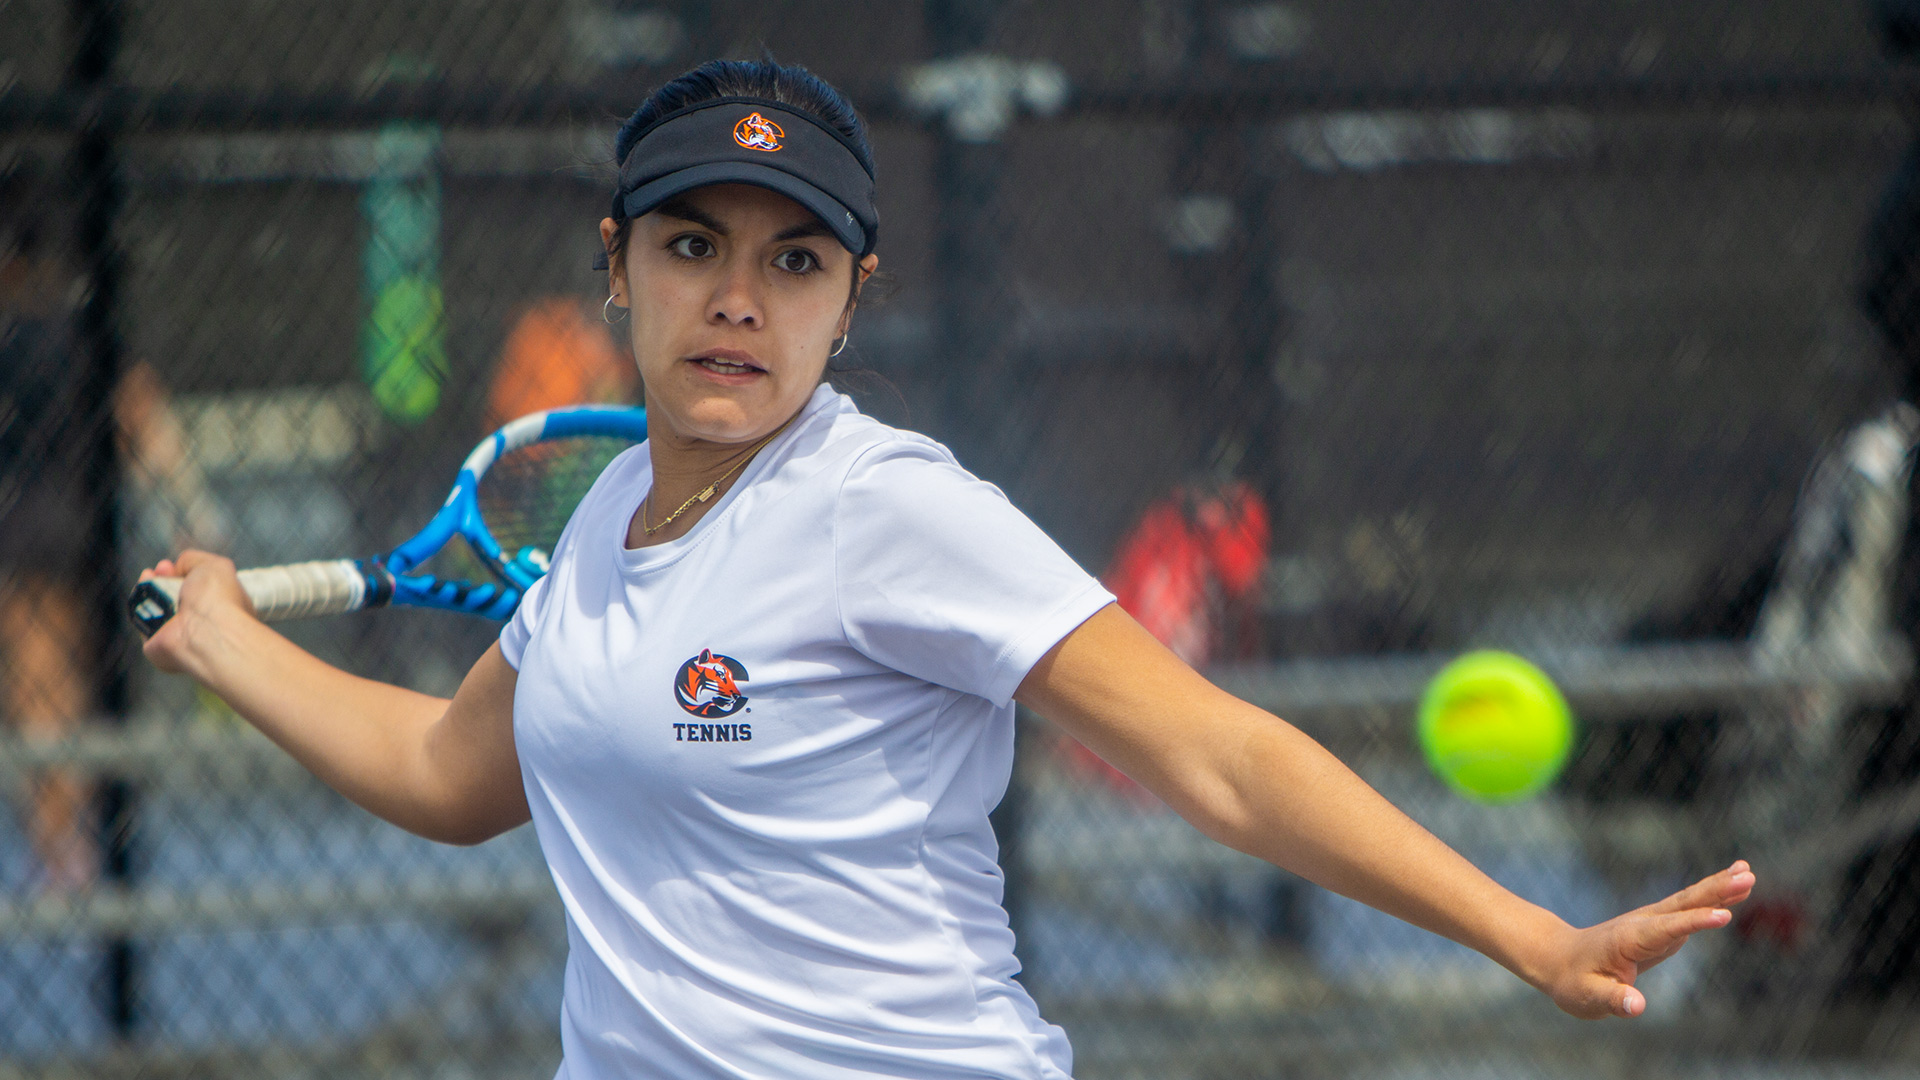 Lady Tiger tennis team tied for first place after day two of the national tourney